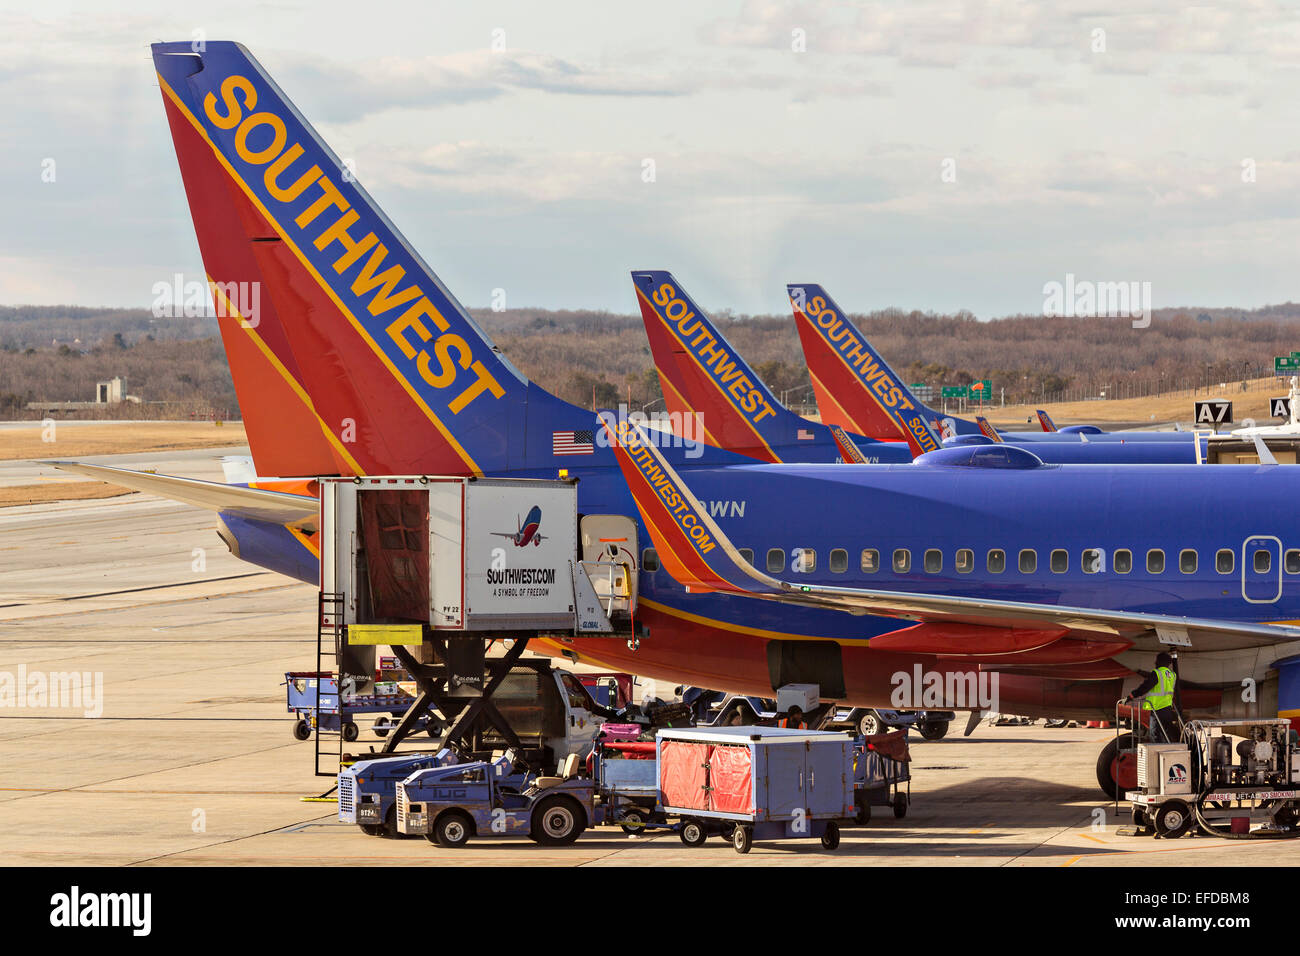 Southwest Airlines Boeing 737 aircraft line up at the gate in Memphis, TN. Stock Photo